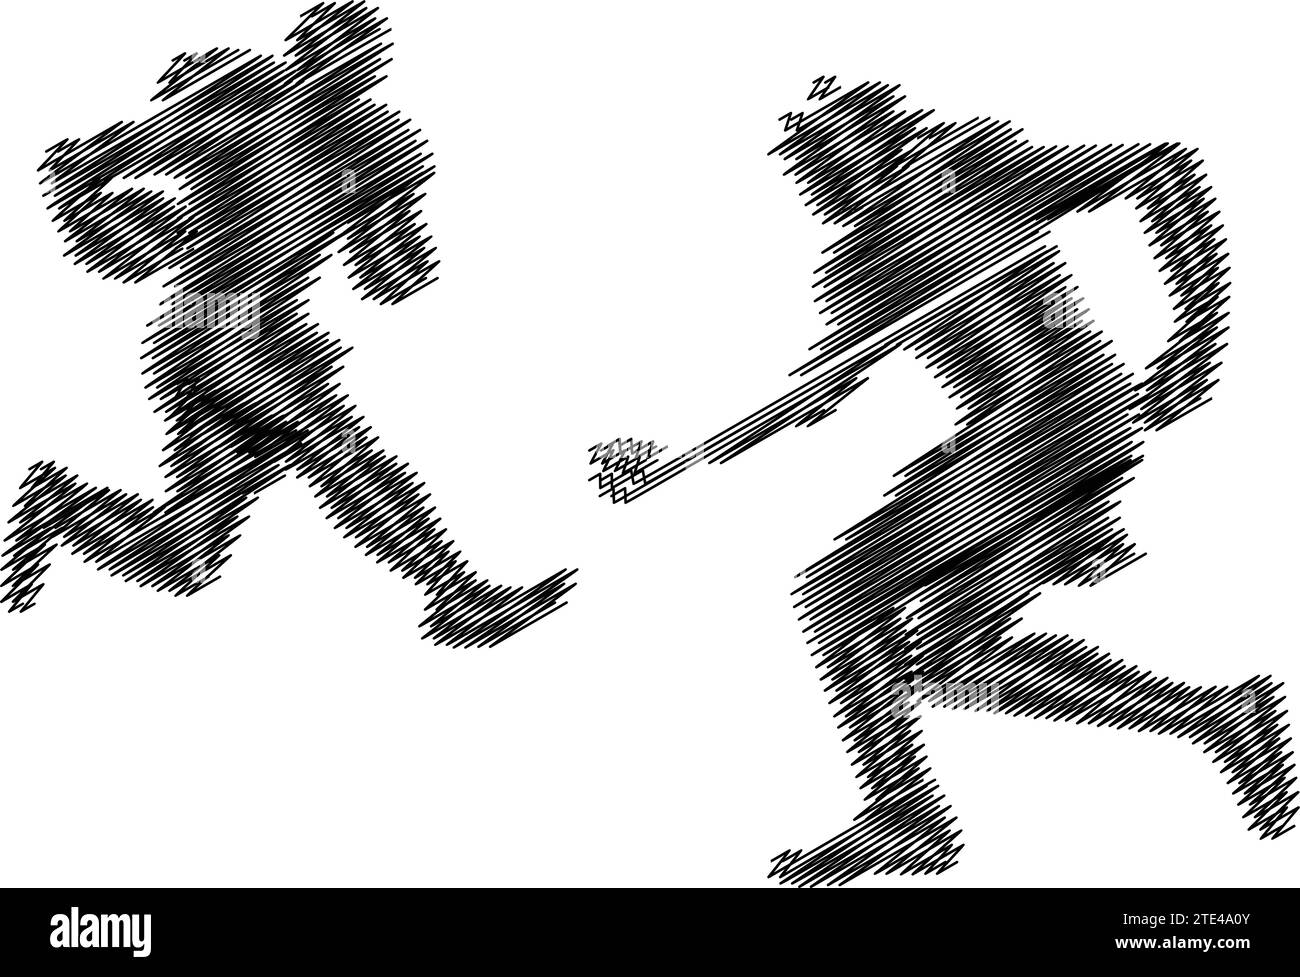 American football players silhouette Stock Vector